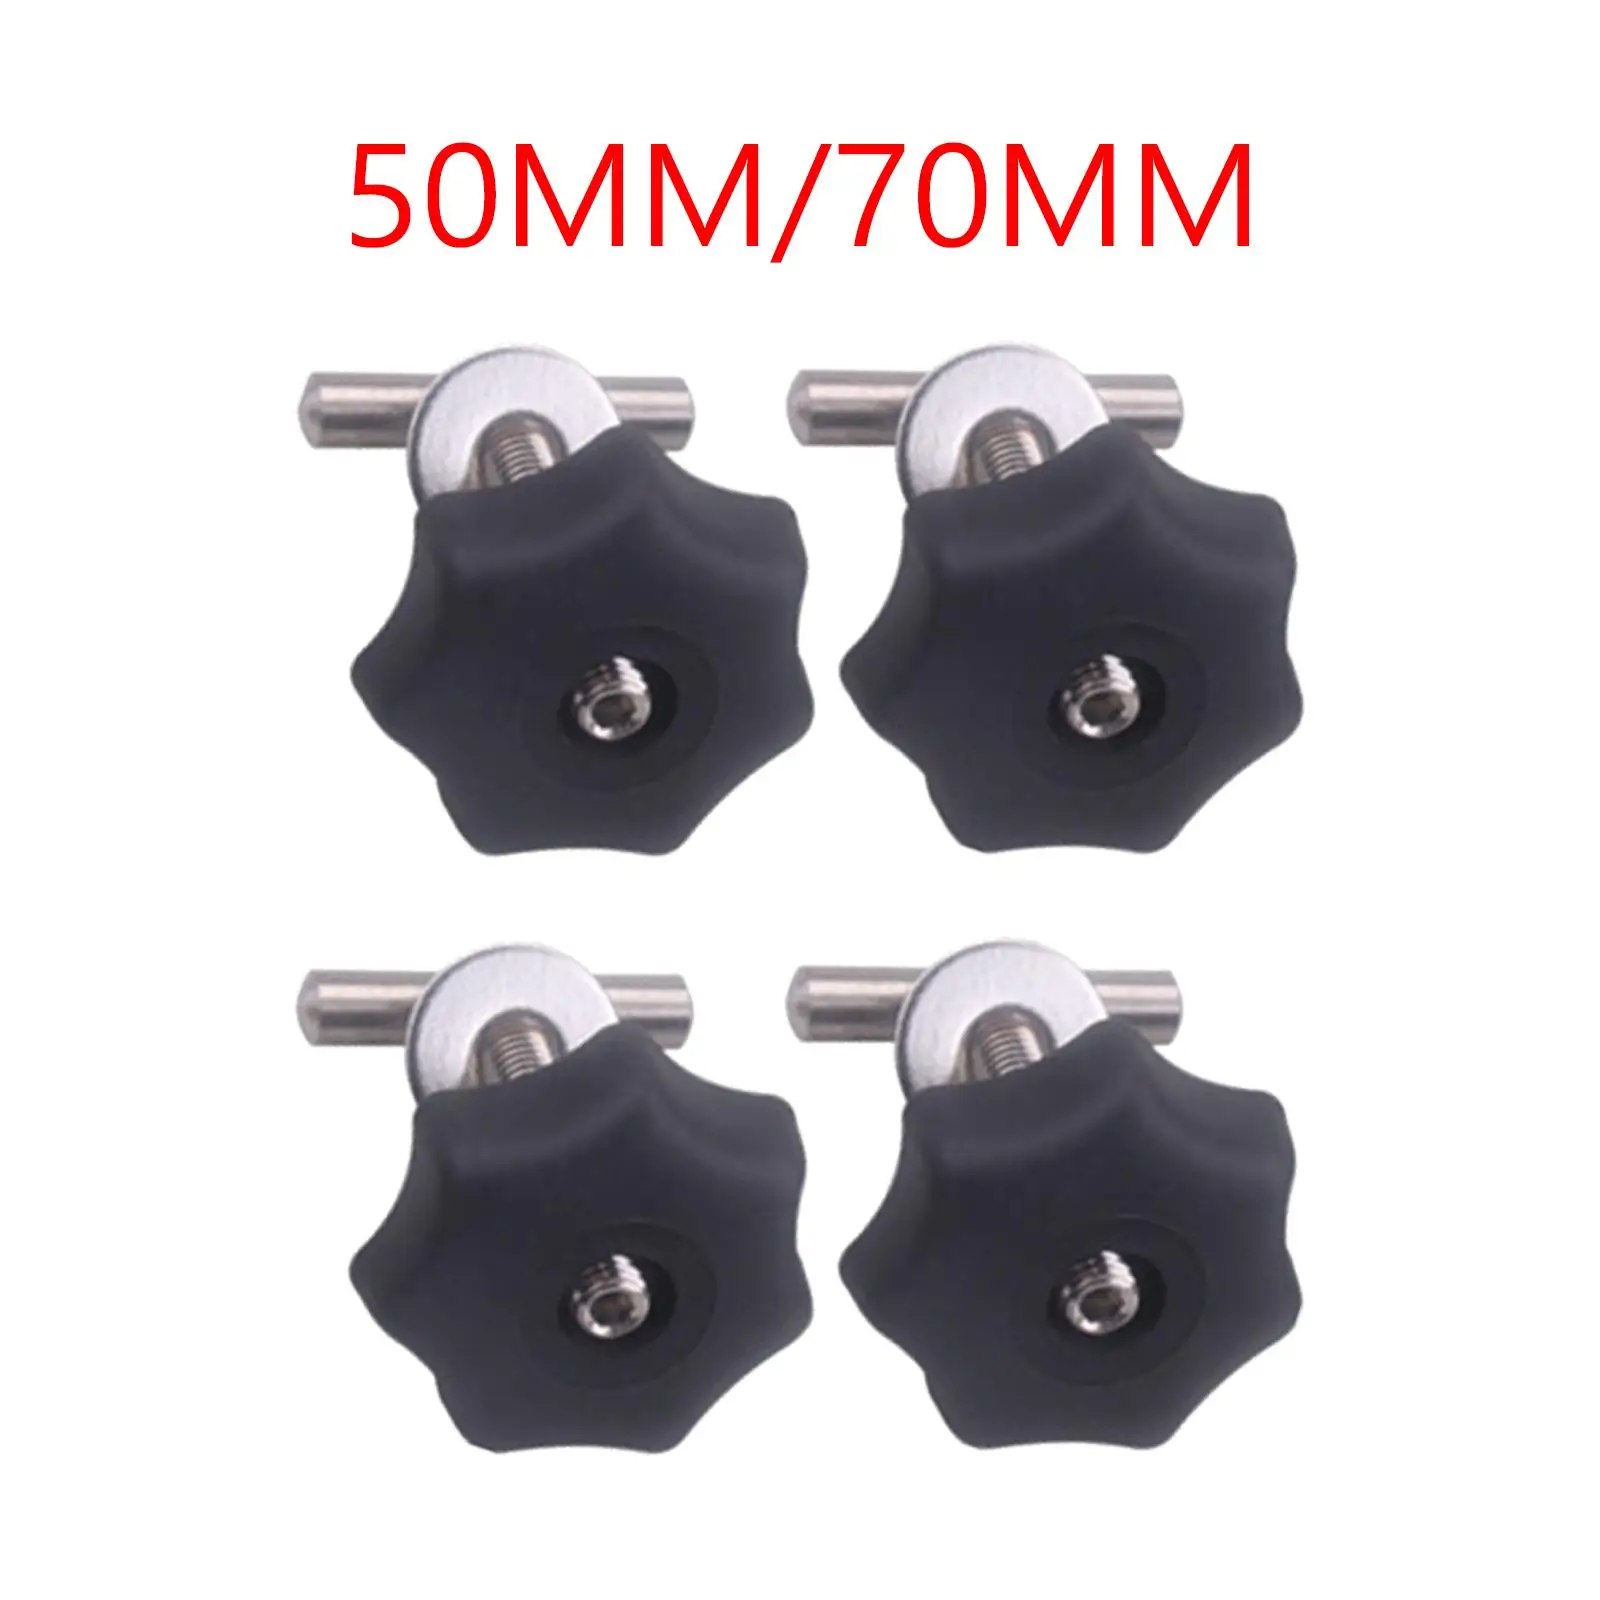 4Pcs Locking Rail Screws Bolt Set Mounting Accessories Stainless Steel Stable